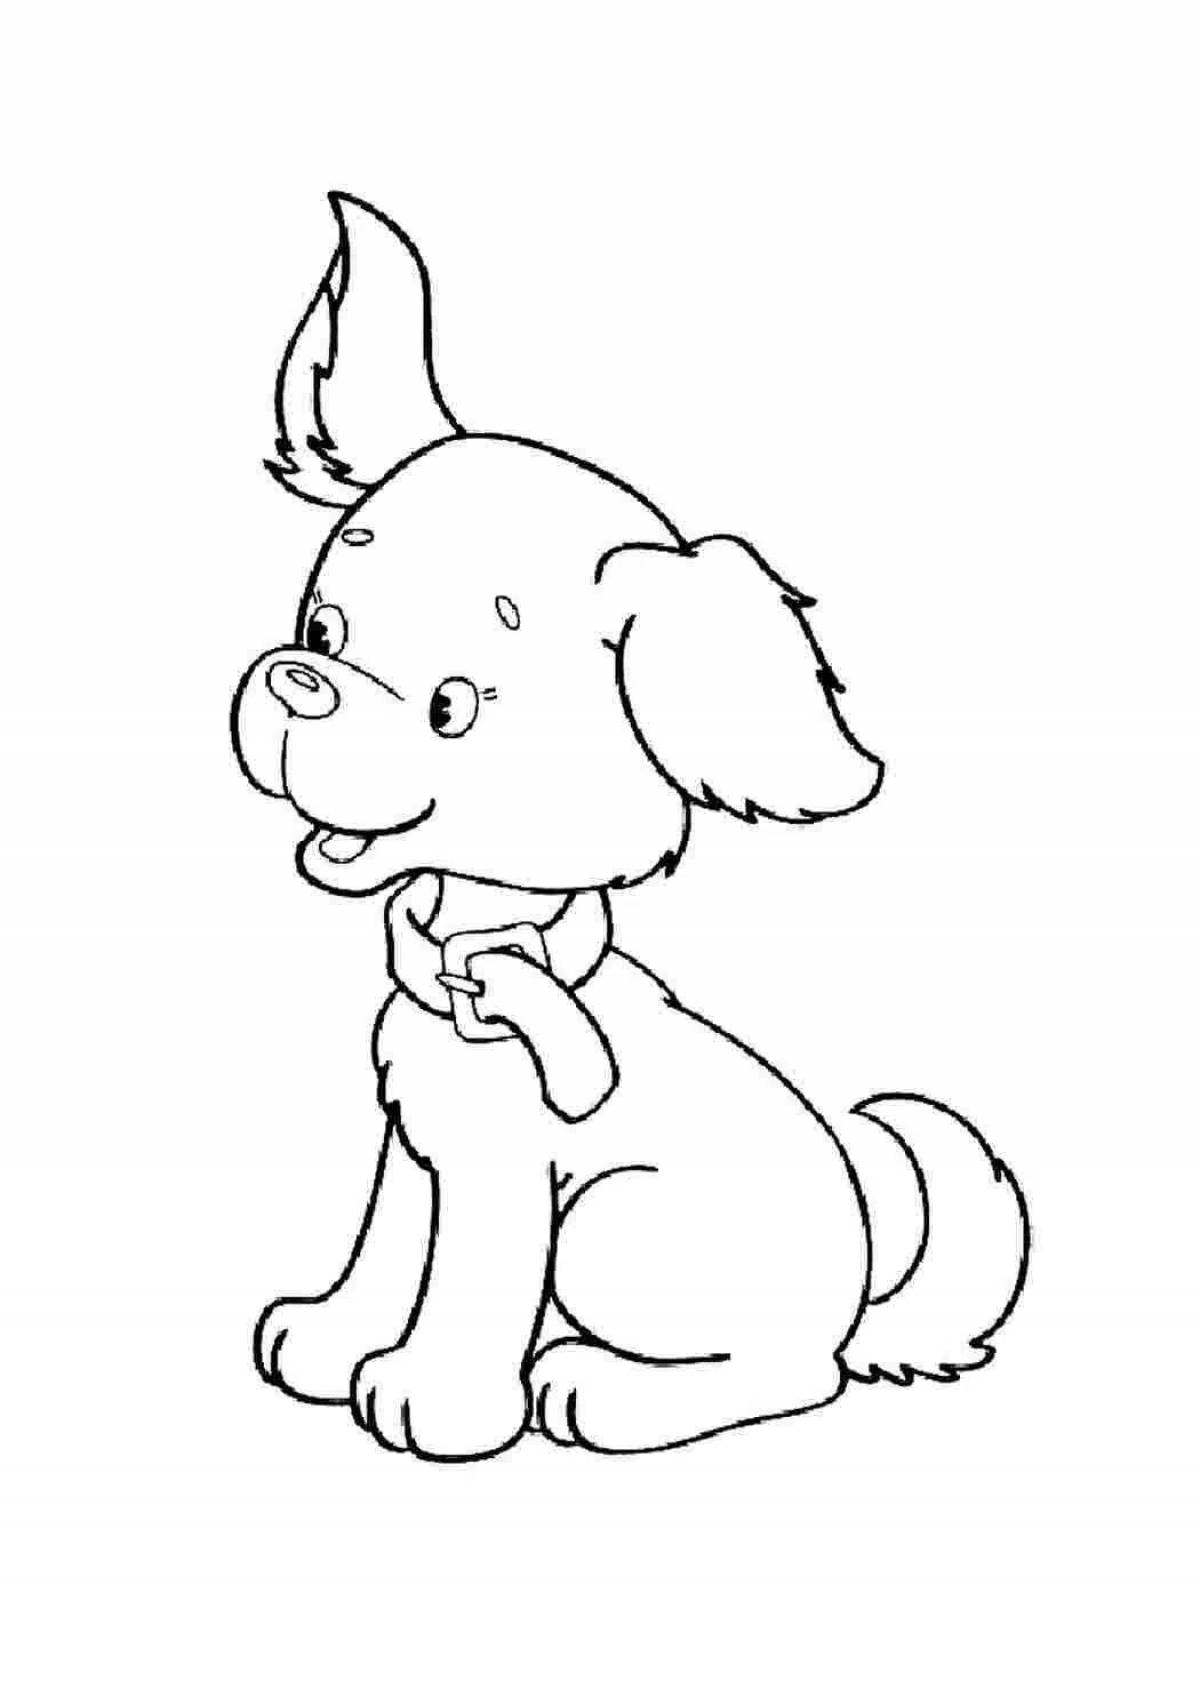 Adorable dog drawing for kids